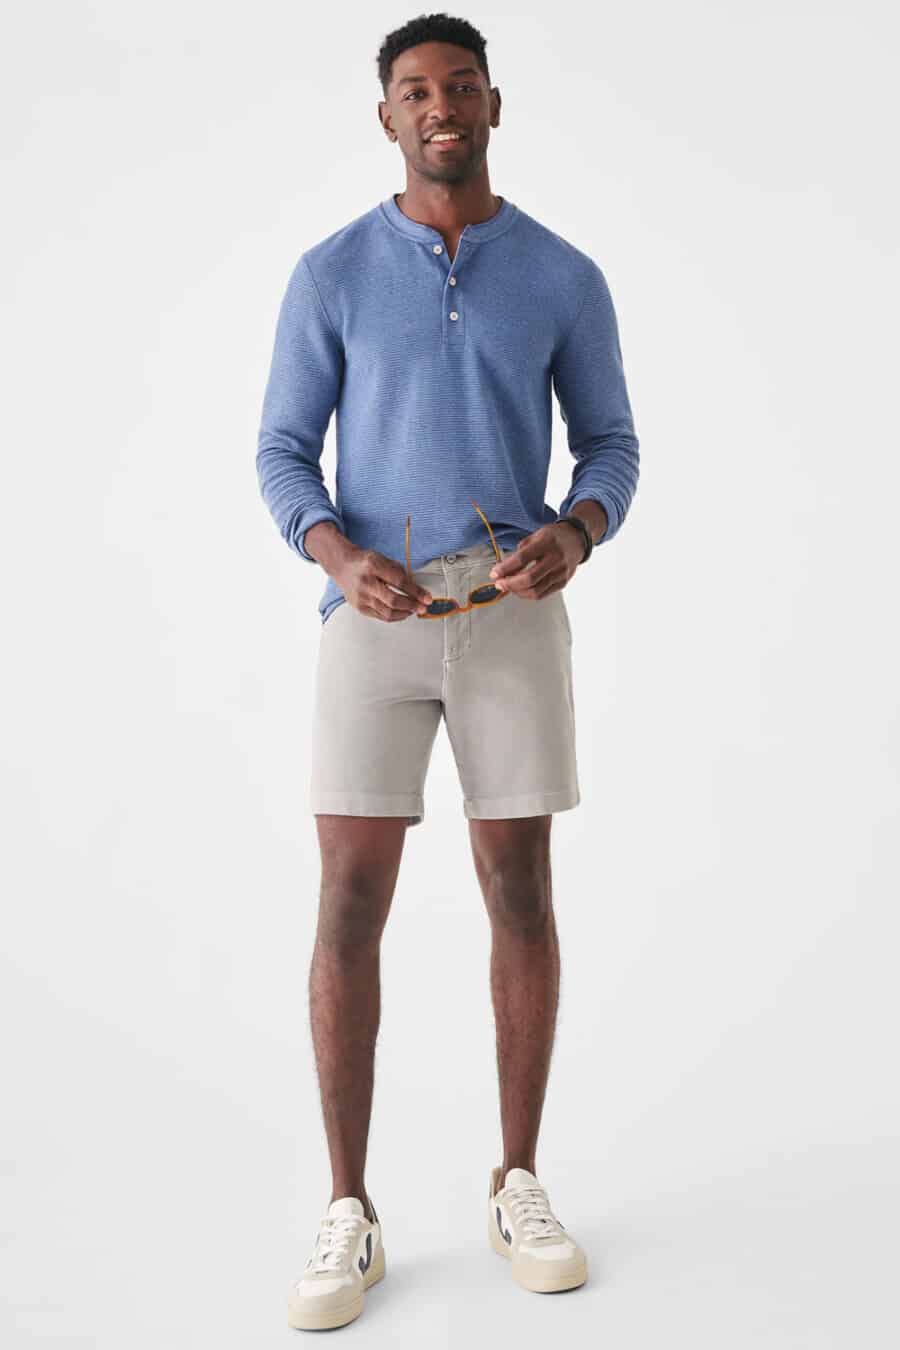 Men's light grey shorts, baby blue Henley shirt and white sneakers outfit